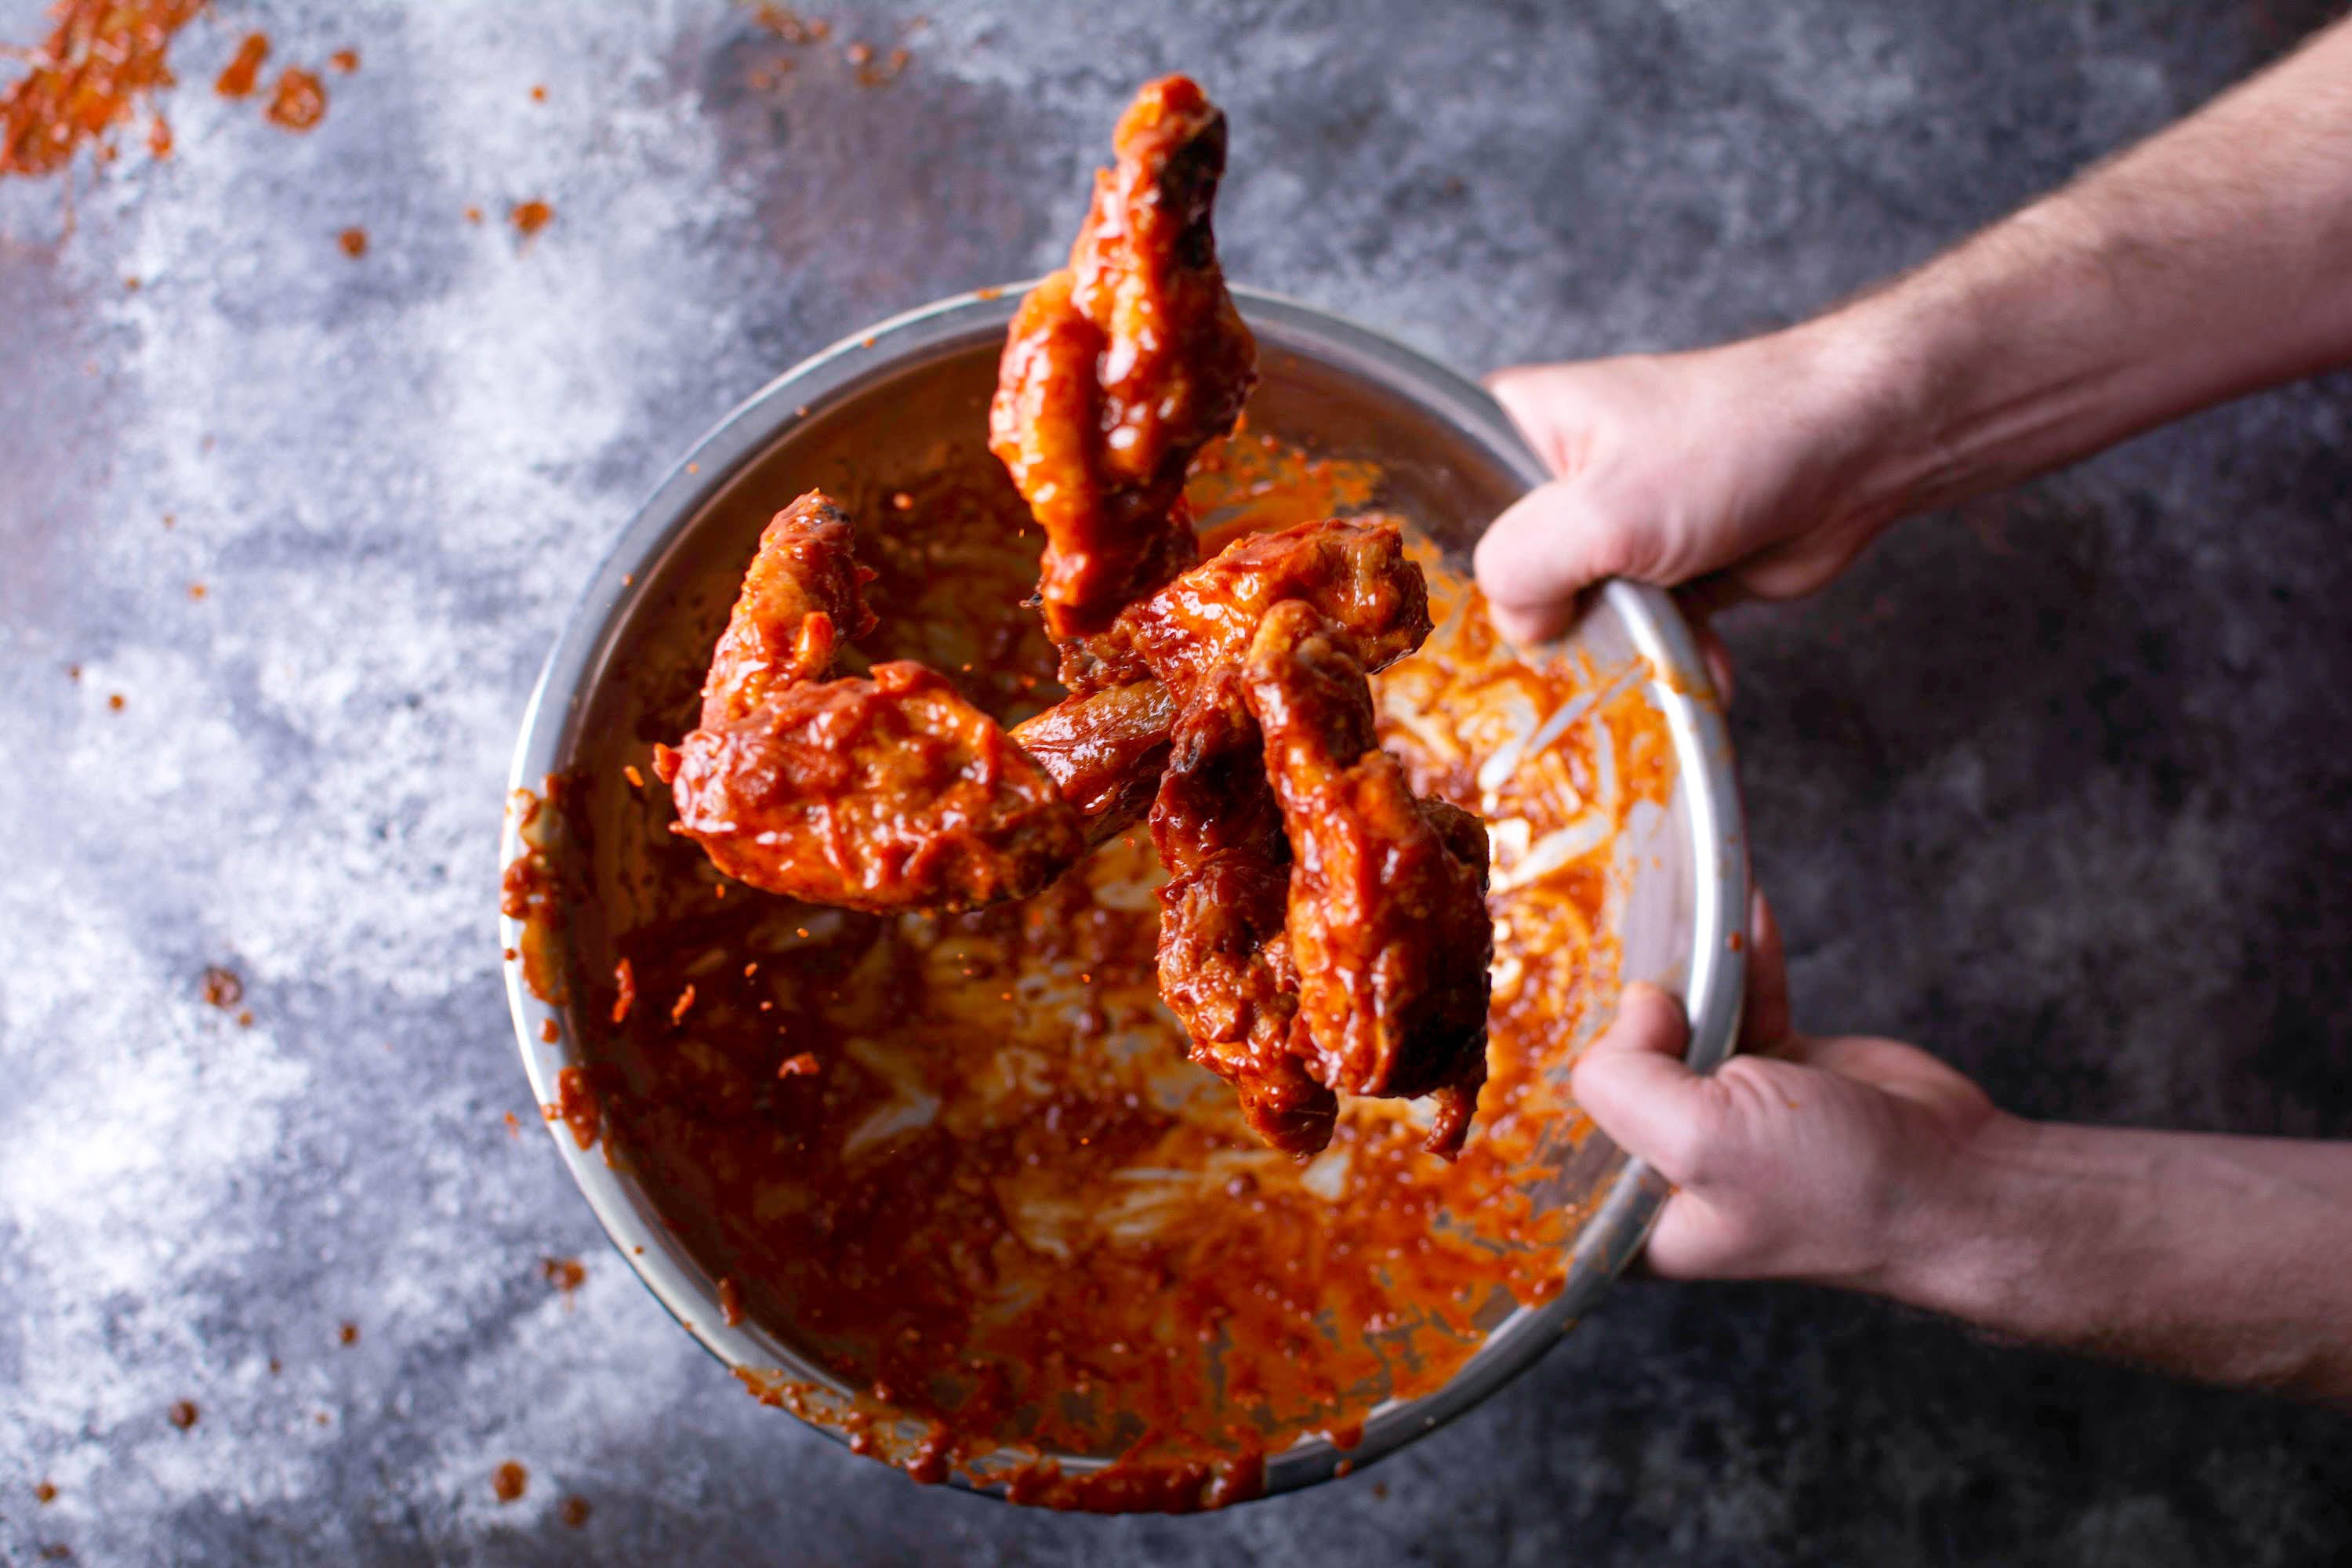 Chicken wings being tossed in a bowl of hot wing sauce